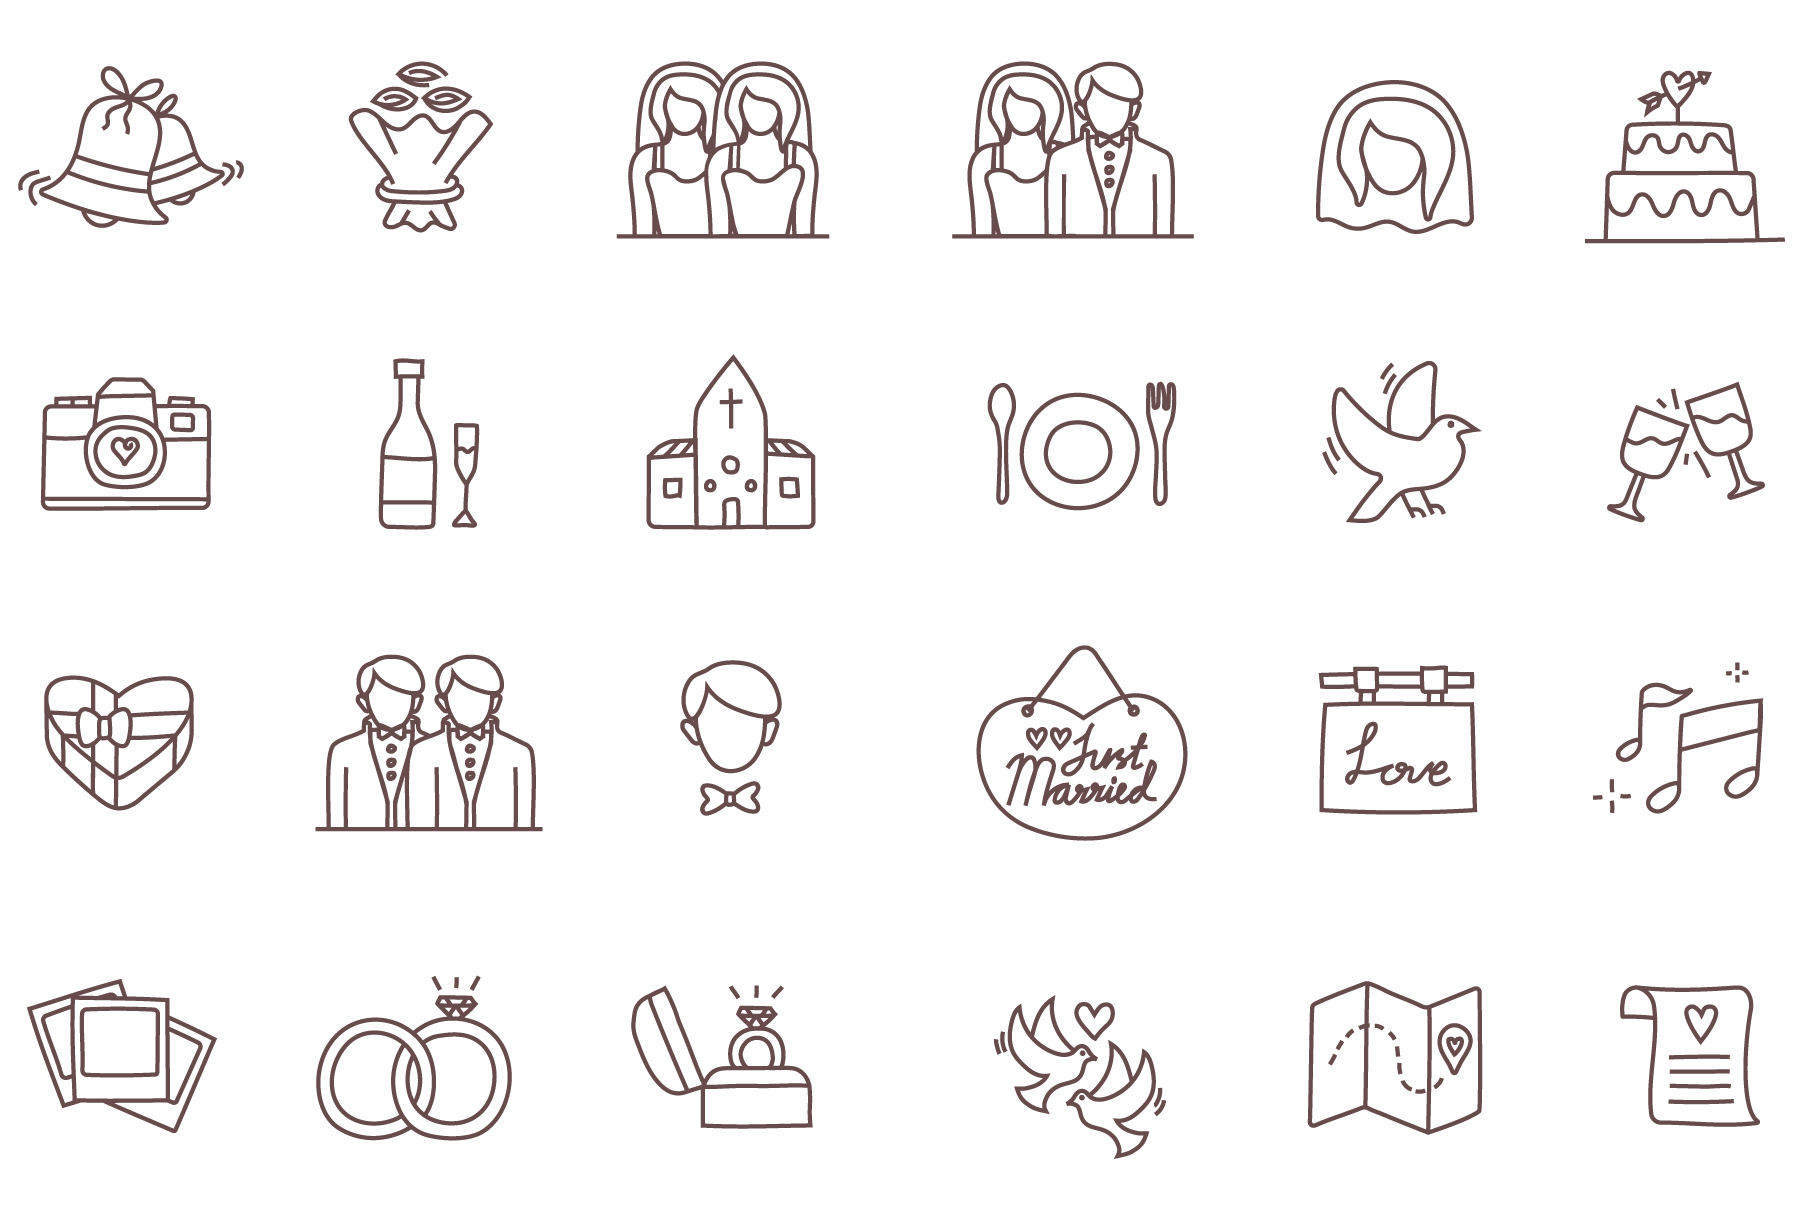 24 Free Wedding Icons By Temploola Linseed Studio Premium And Free Graphic Design Assets